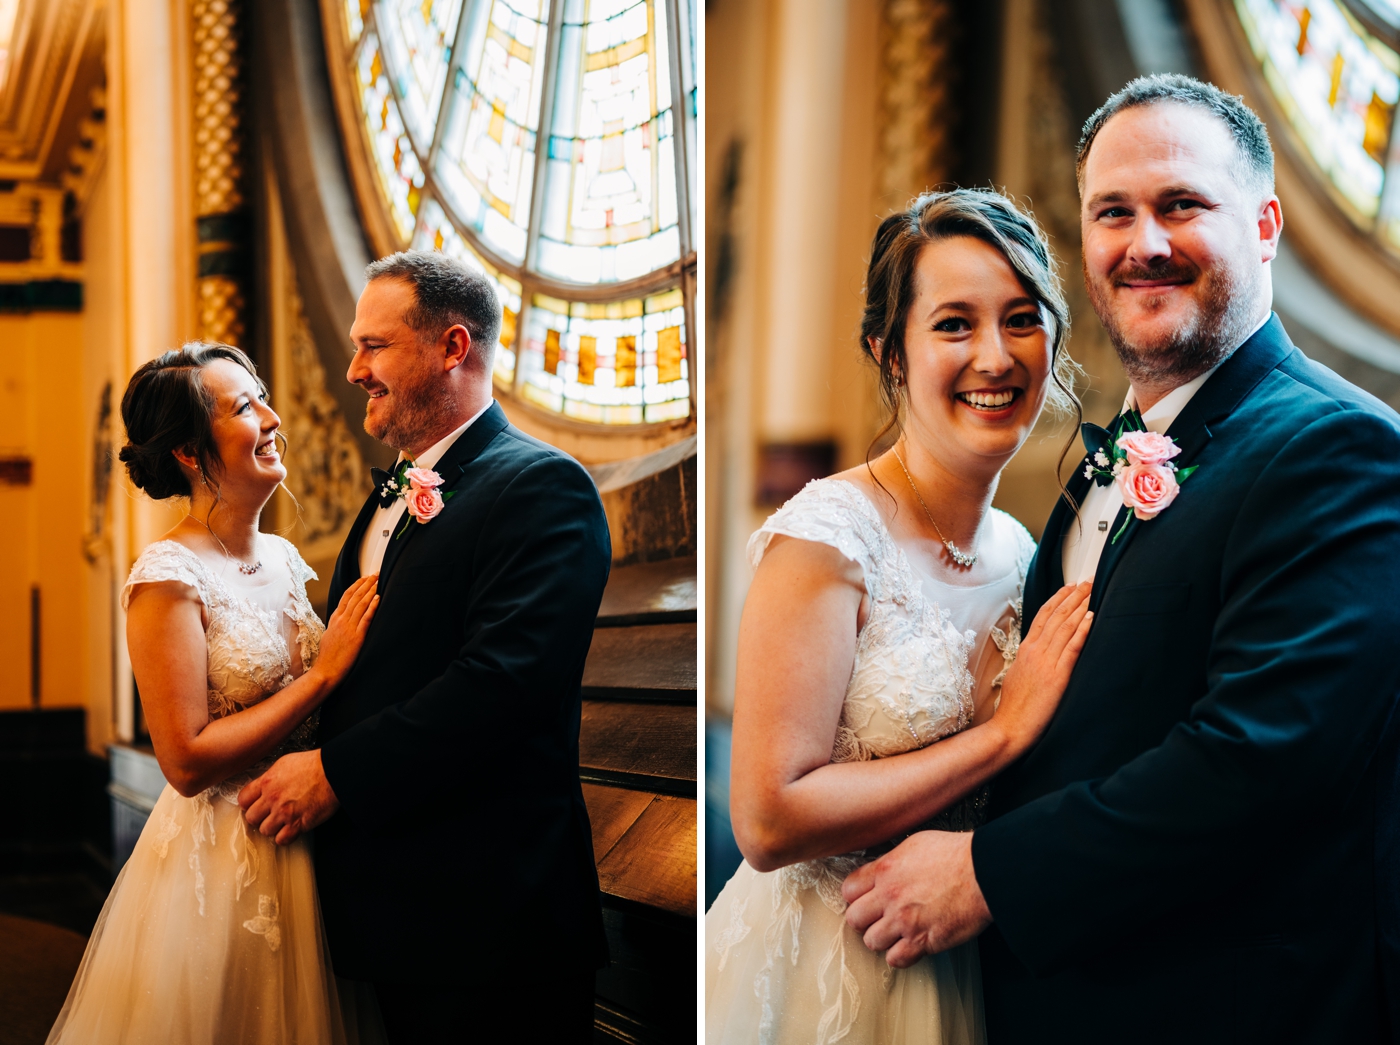 Bride and groom portraits in front of stained glass window at Union Station